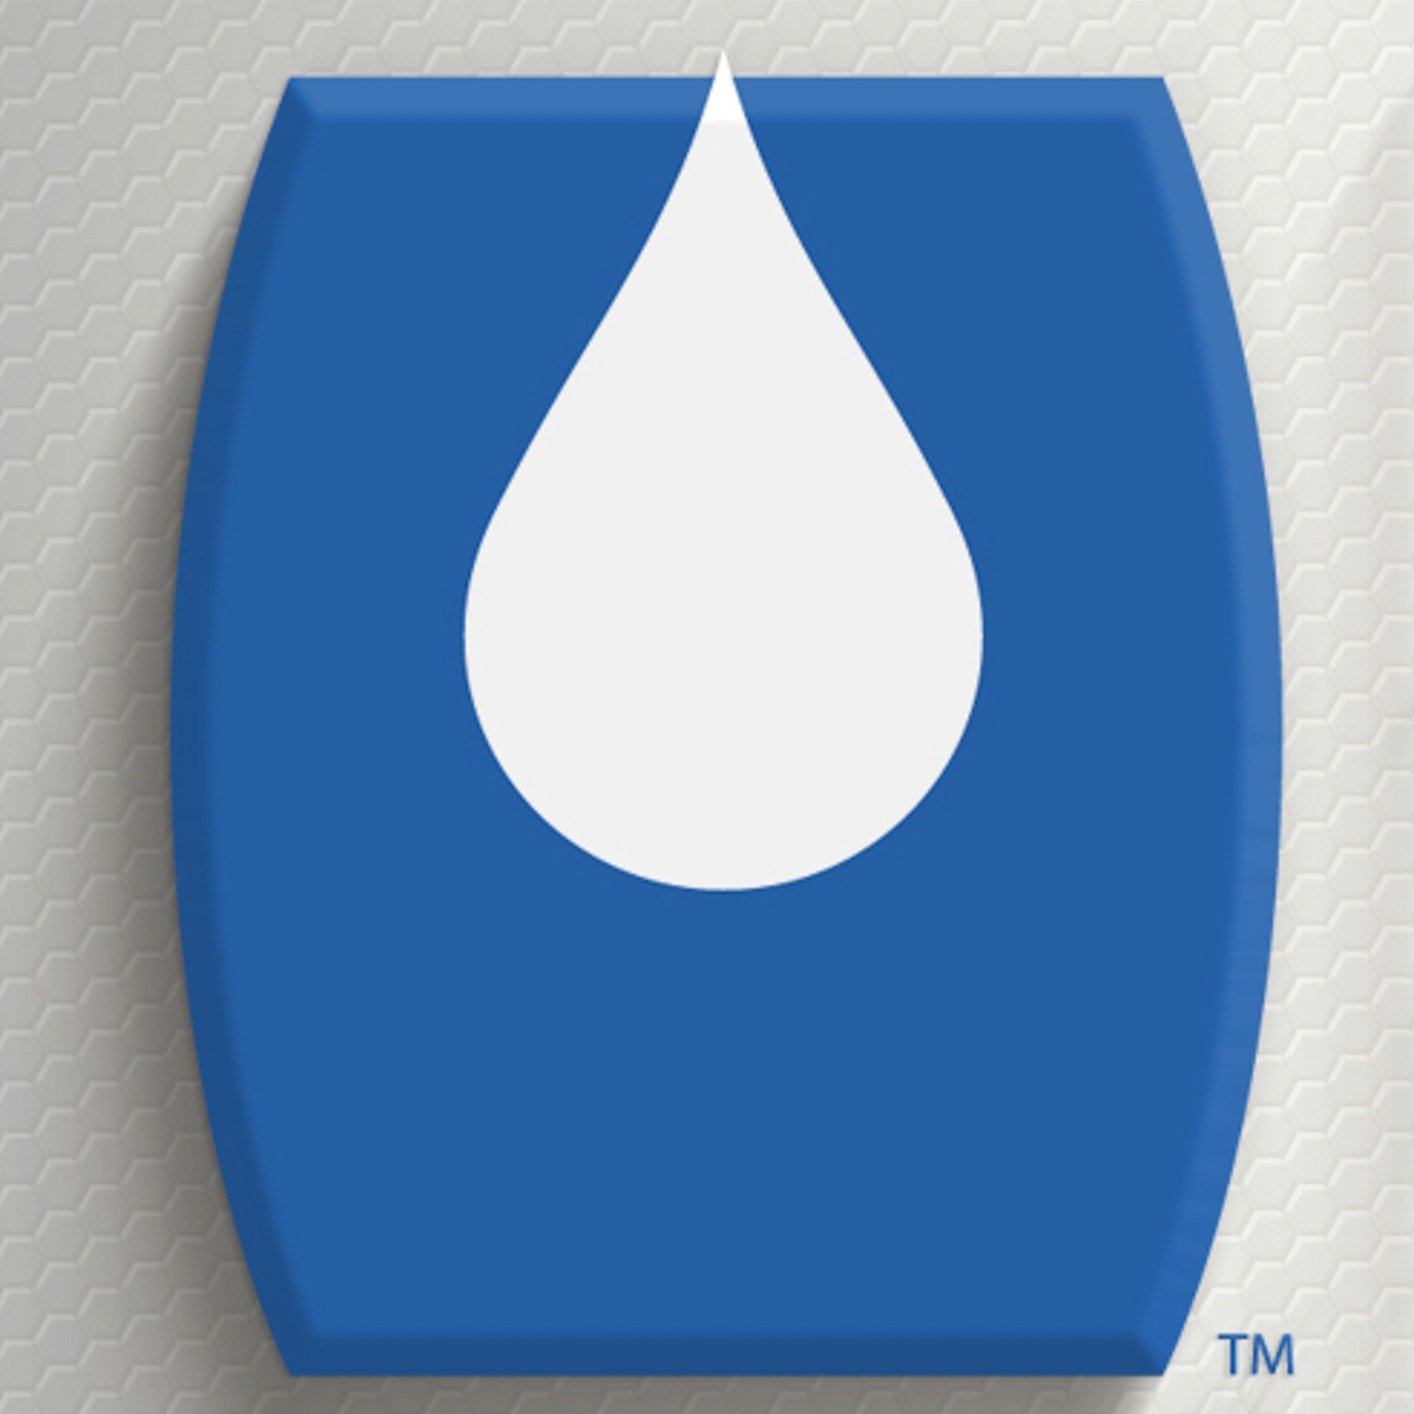 On line Leader in Water Conservation Products  https://t.co/JJVs3jzxbs